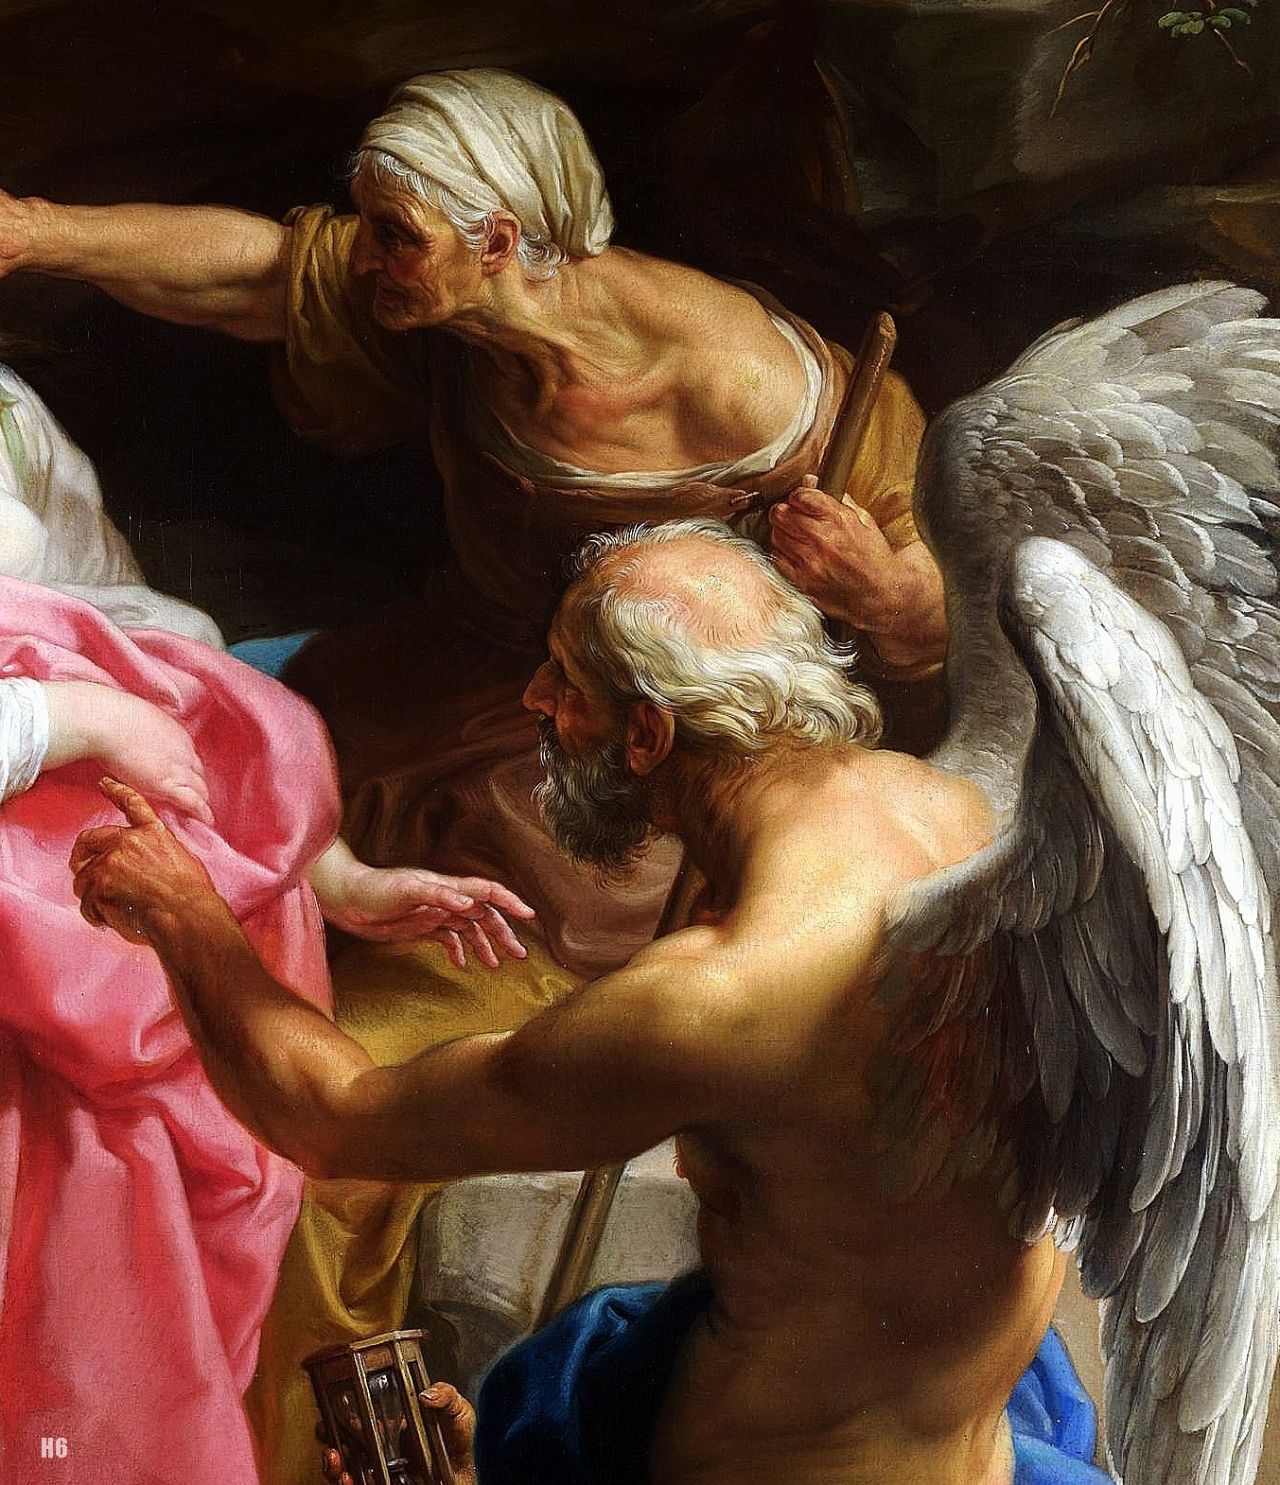 Detail&#160;: Time Orders Old Age to Destroy Beauty. 1746. Pompeo Batoni. Italian 1708-1787. oil/canvas.
http://hadrian6.tumblr.com